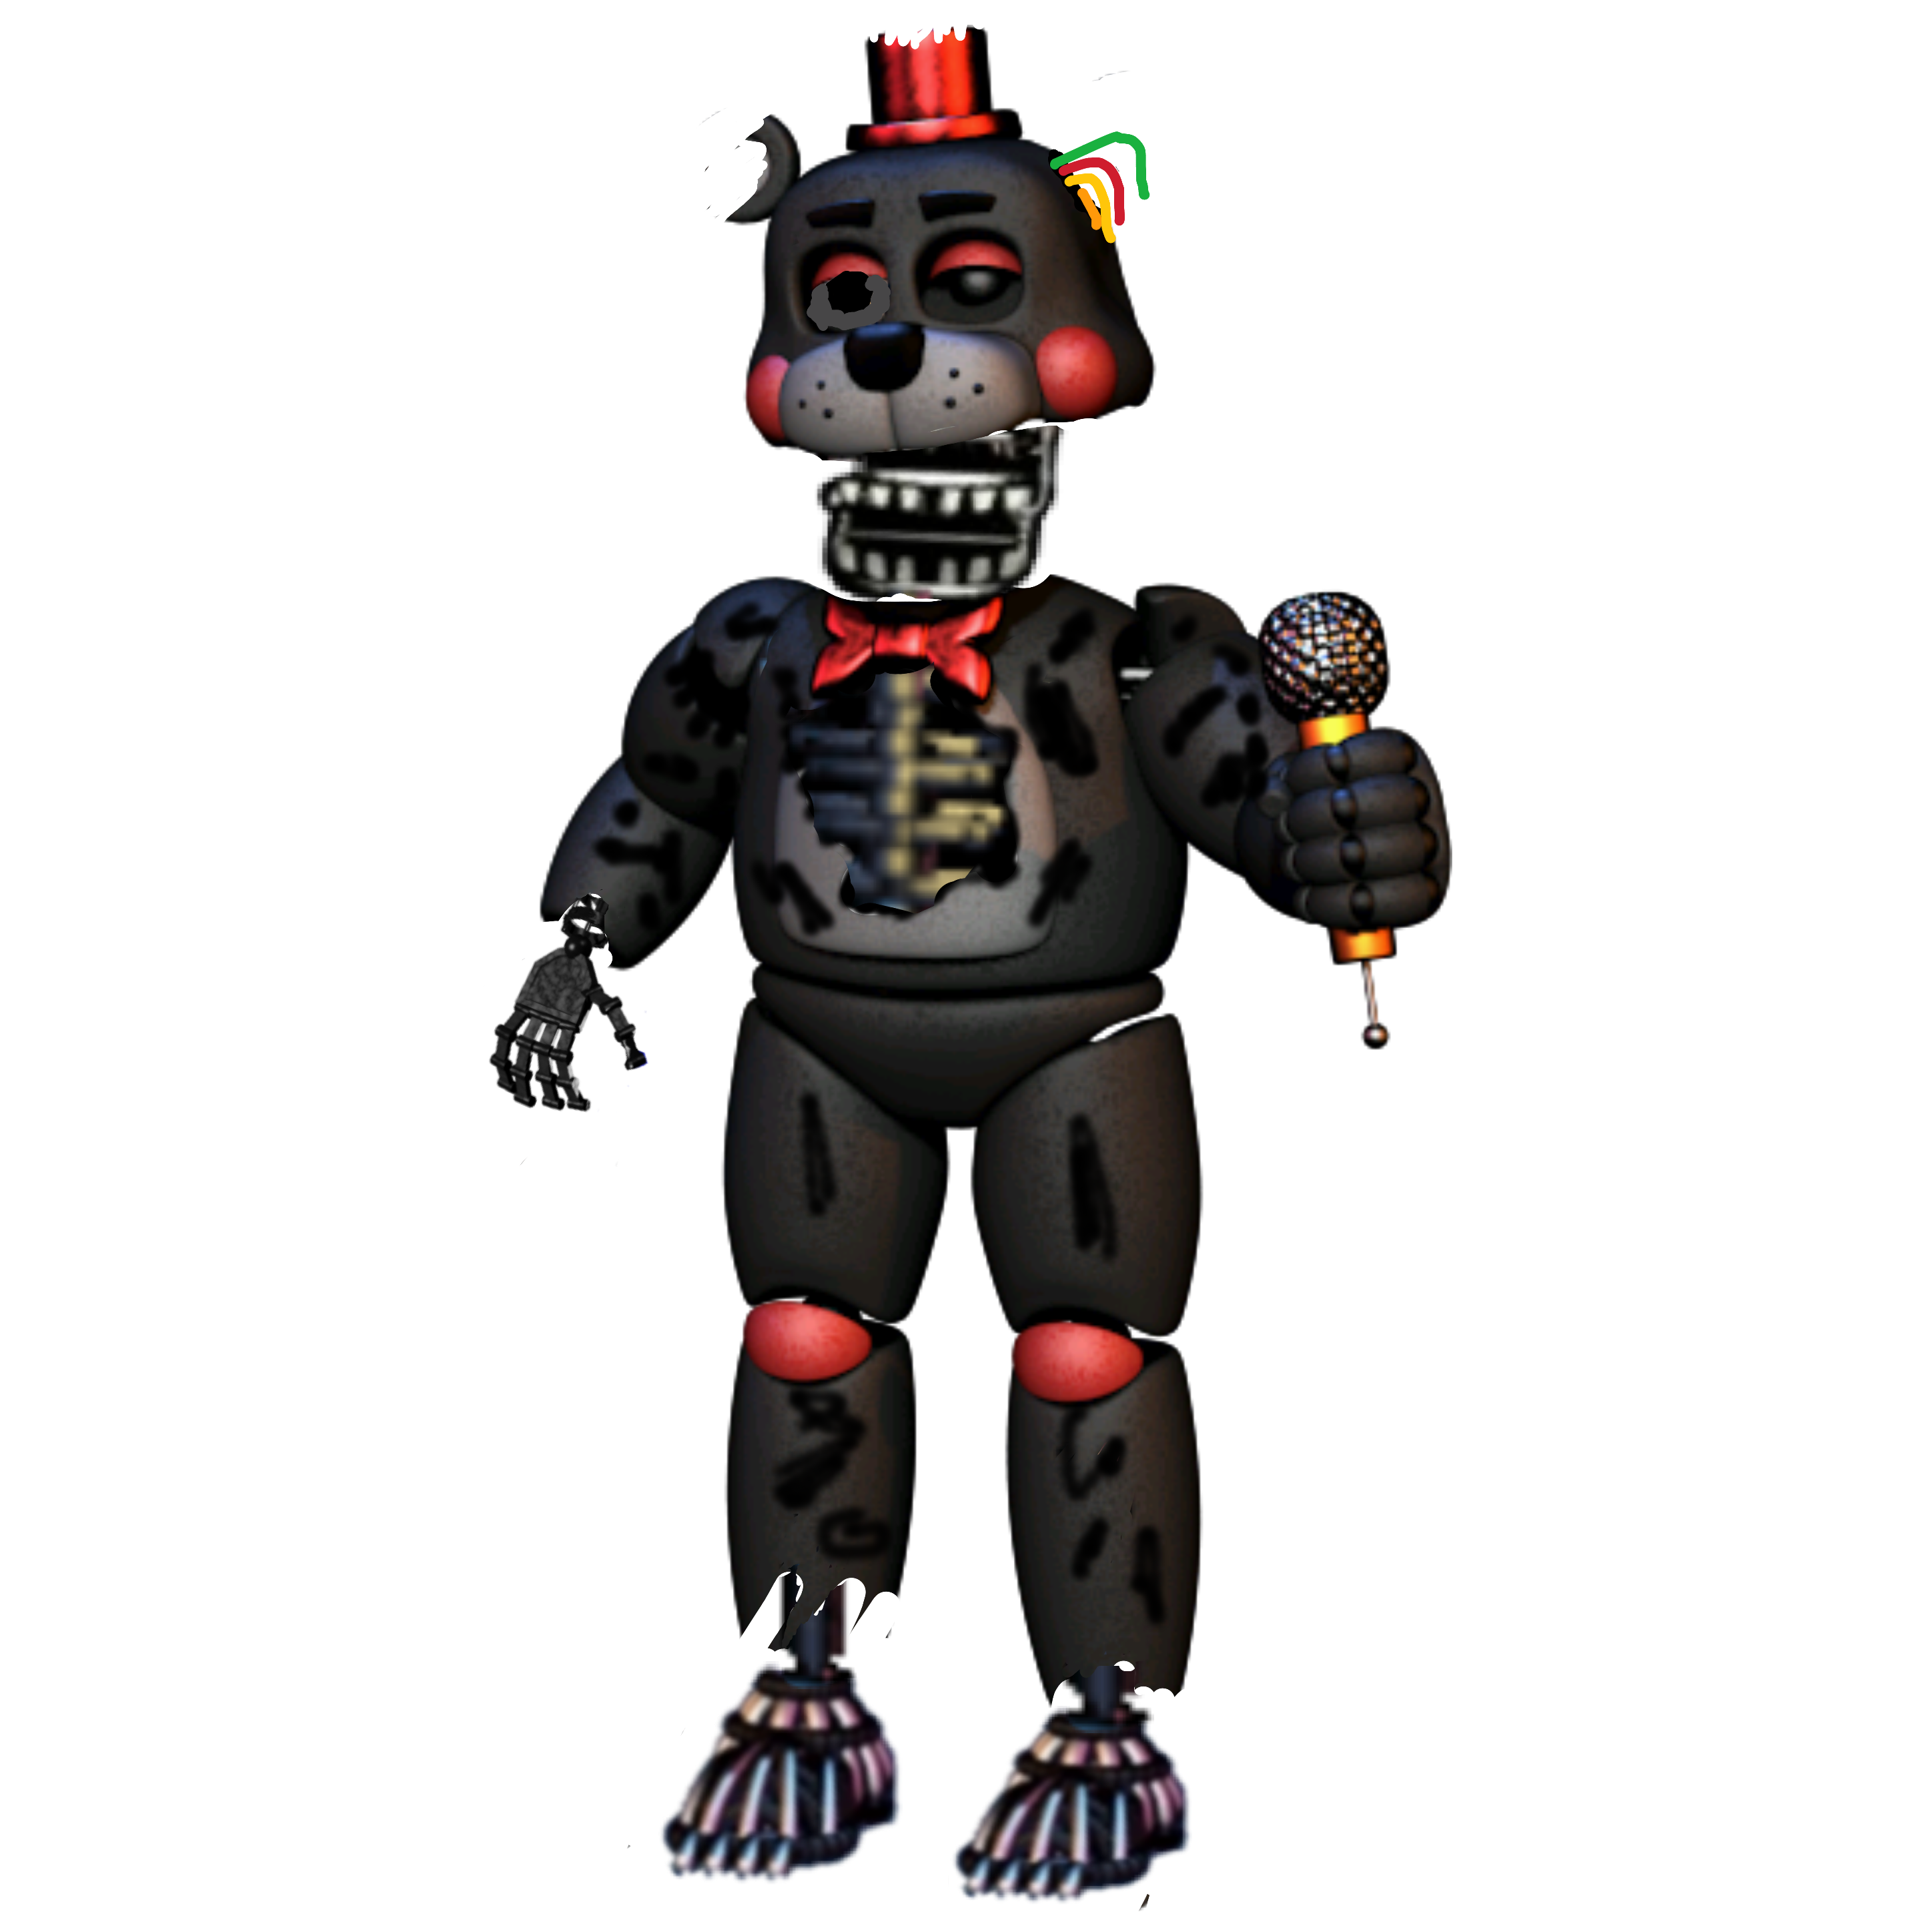 This visual is about fnaf7 freetoedit Withered/scraped lefty #fnaf7.